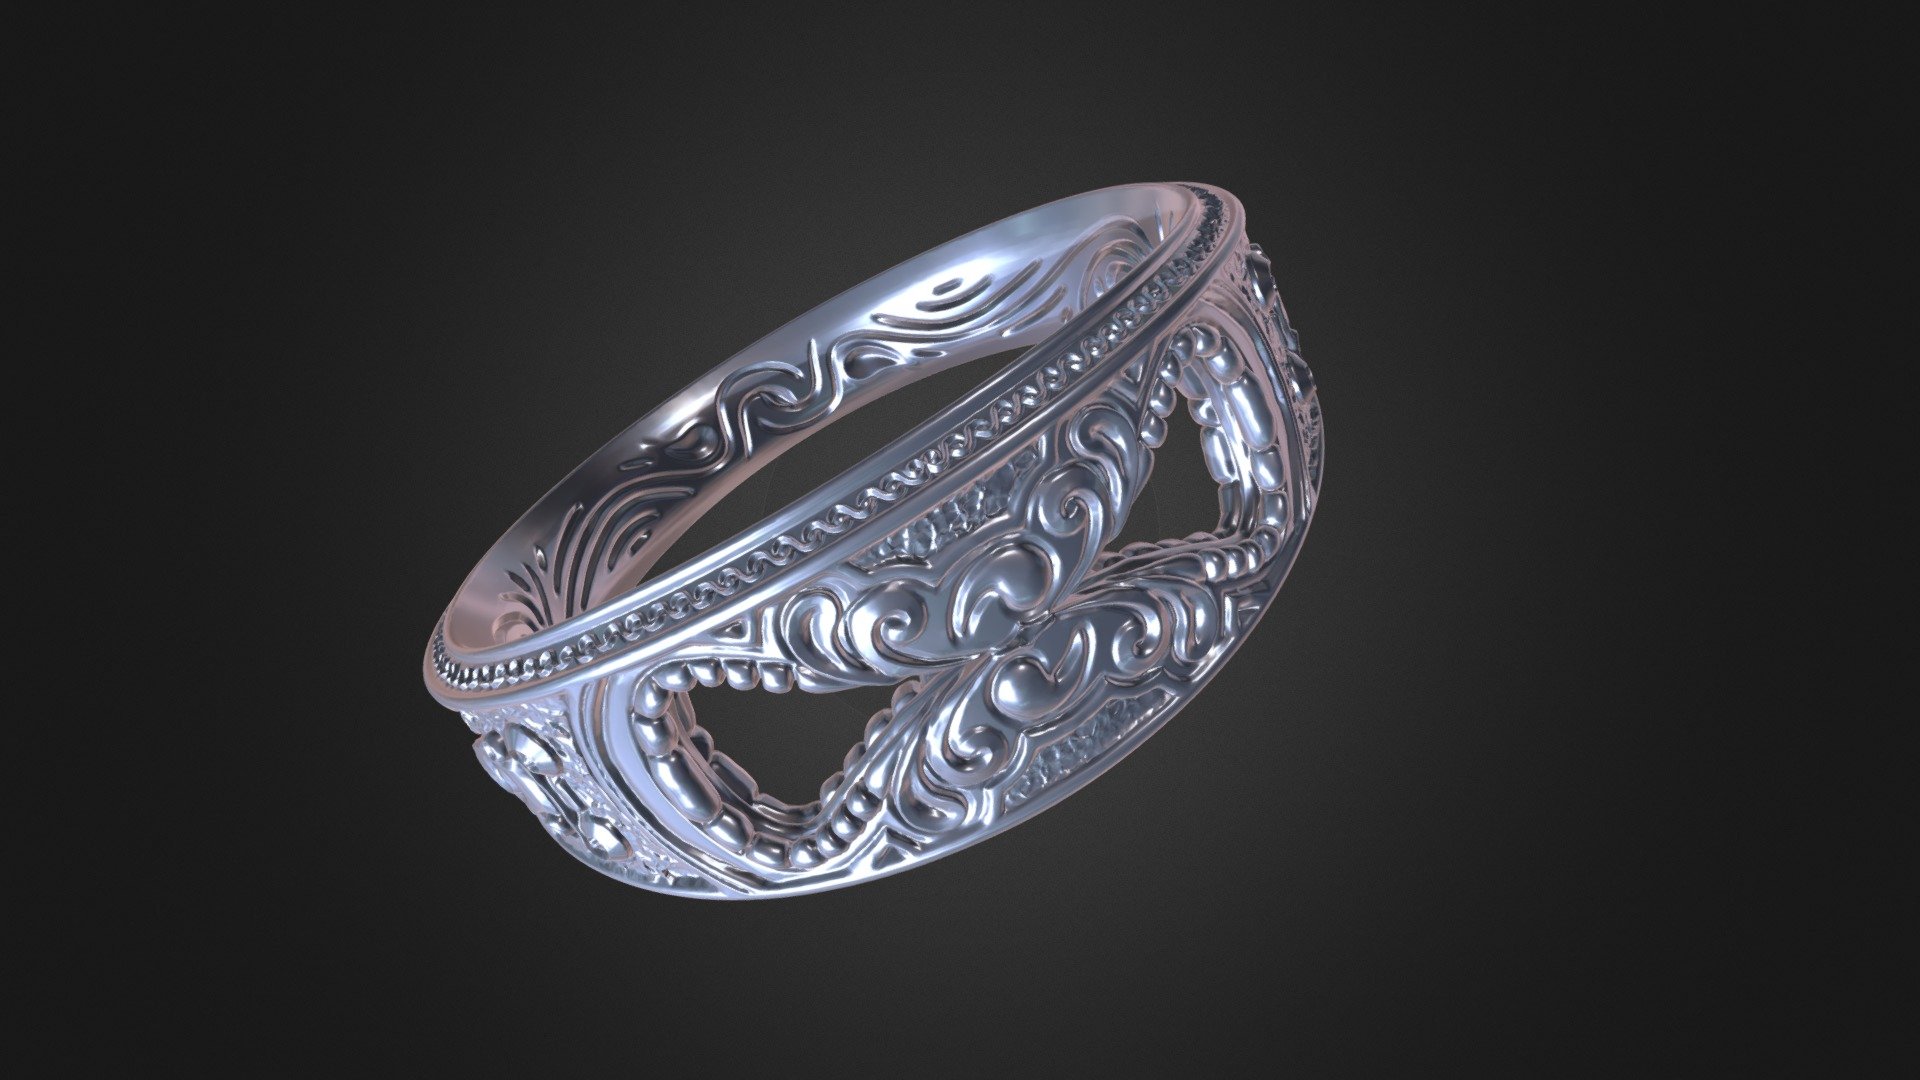 Work on my own wedding ring.

A video explaning some of the processes I used to create this ring can be found on Youtube. Link below.

https://www.youtube.com/watch?v=CUaHSk7CssY&amp;feature=youtu.be - Wedding Ring - 3D model by Ian Southwell (@iasouthwell) 3d model